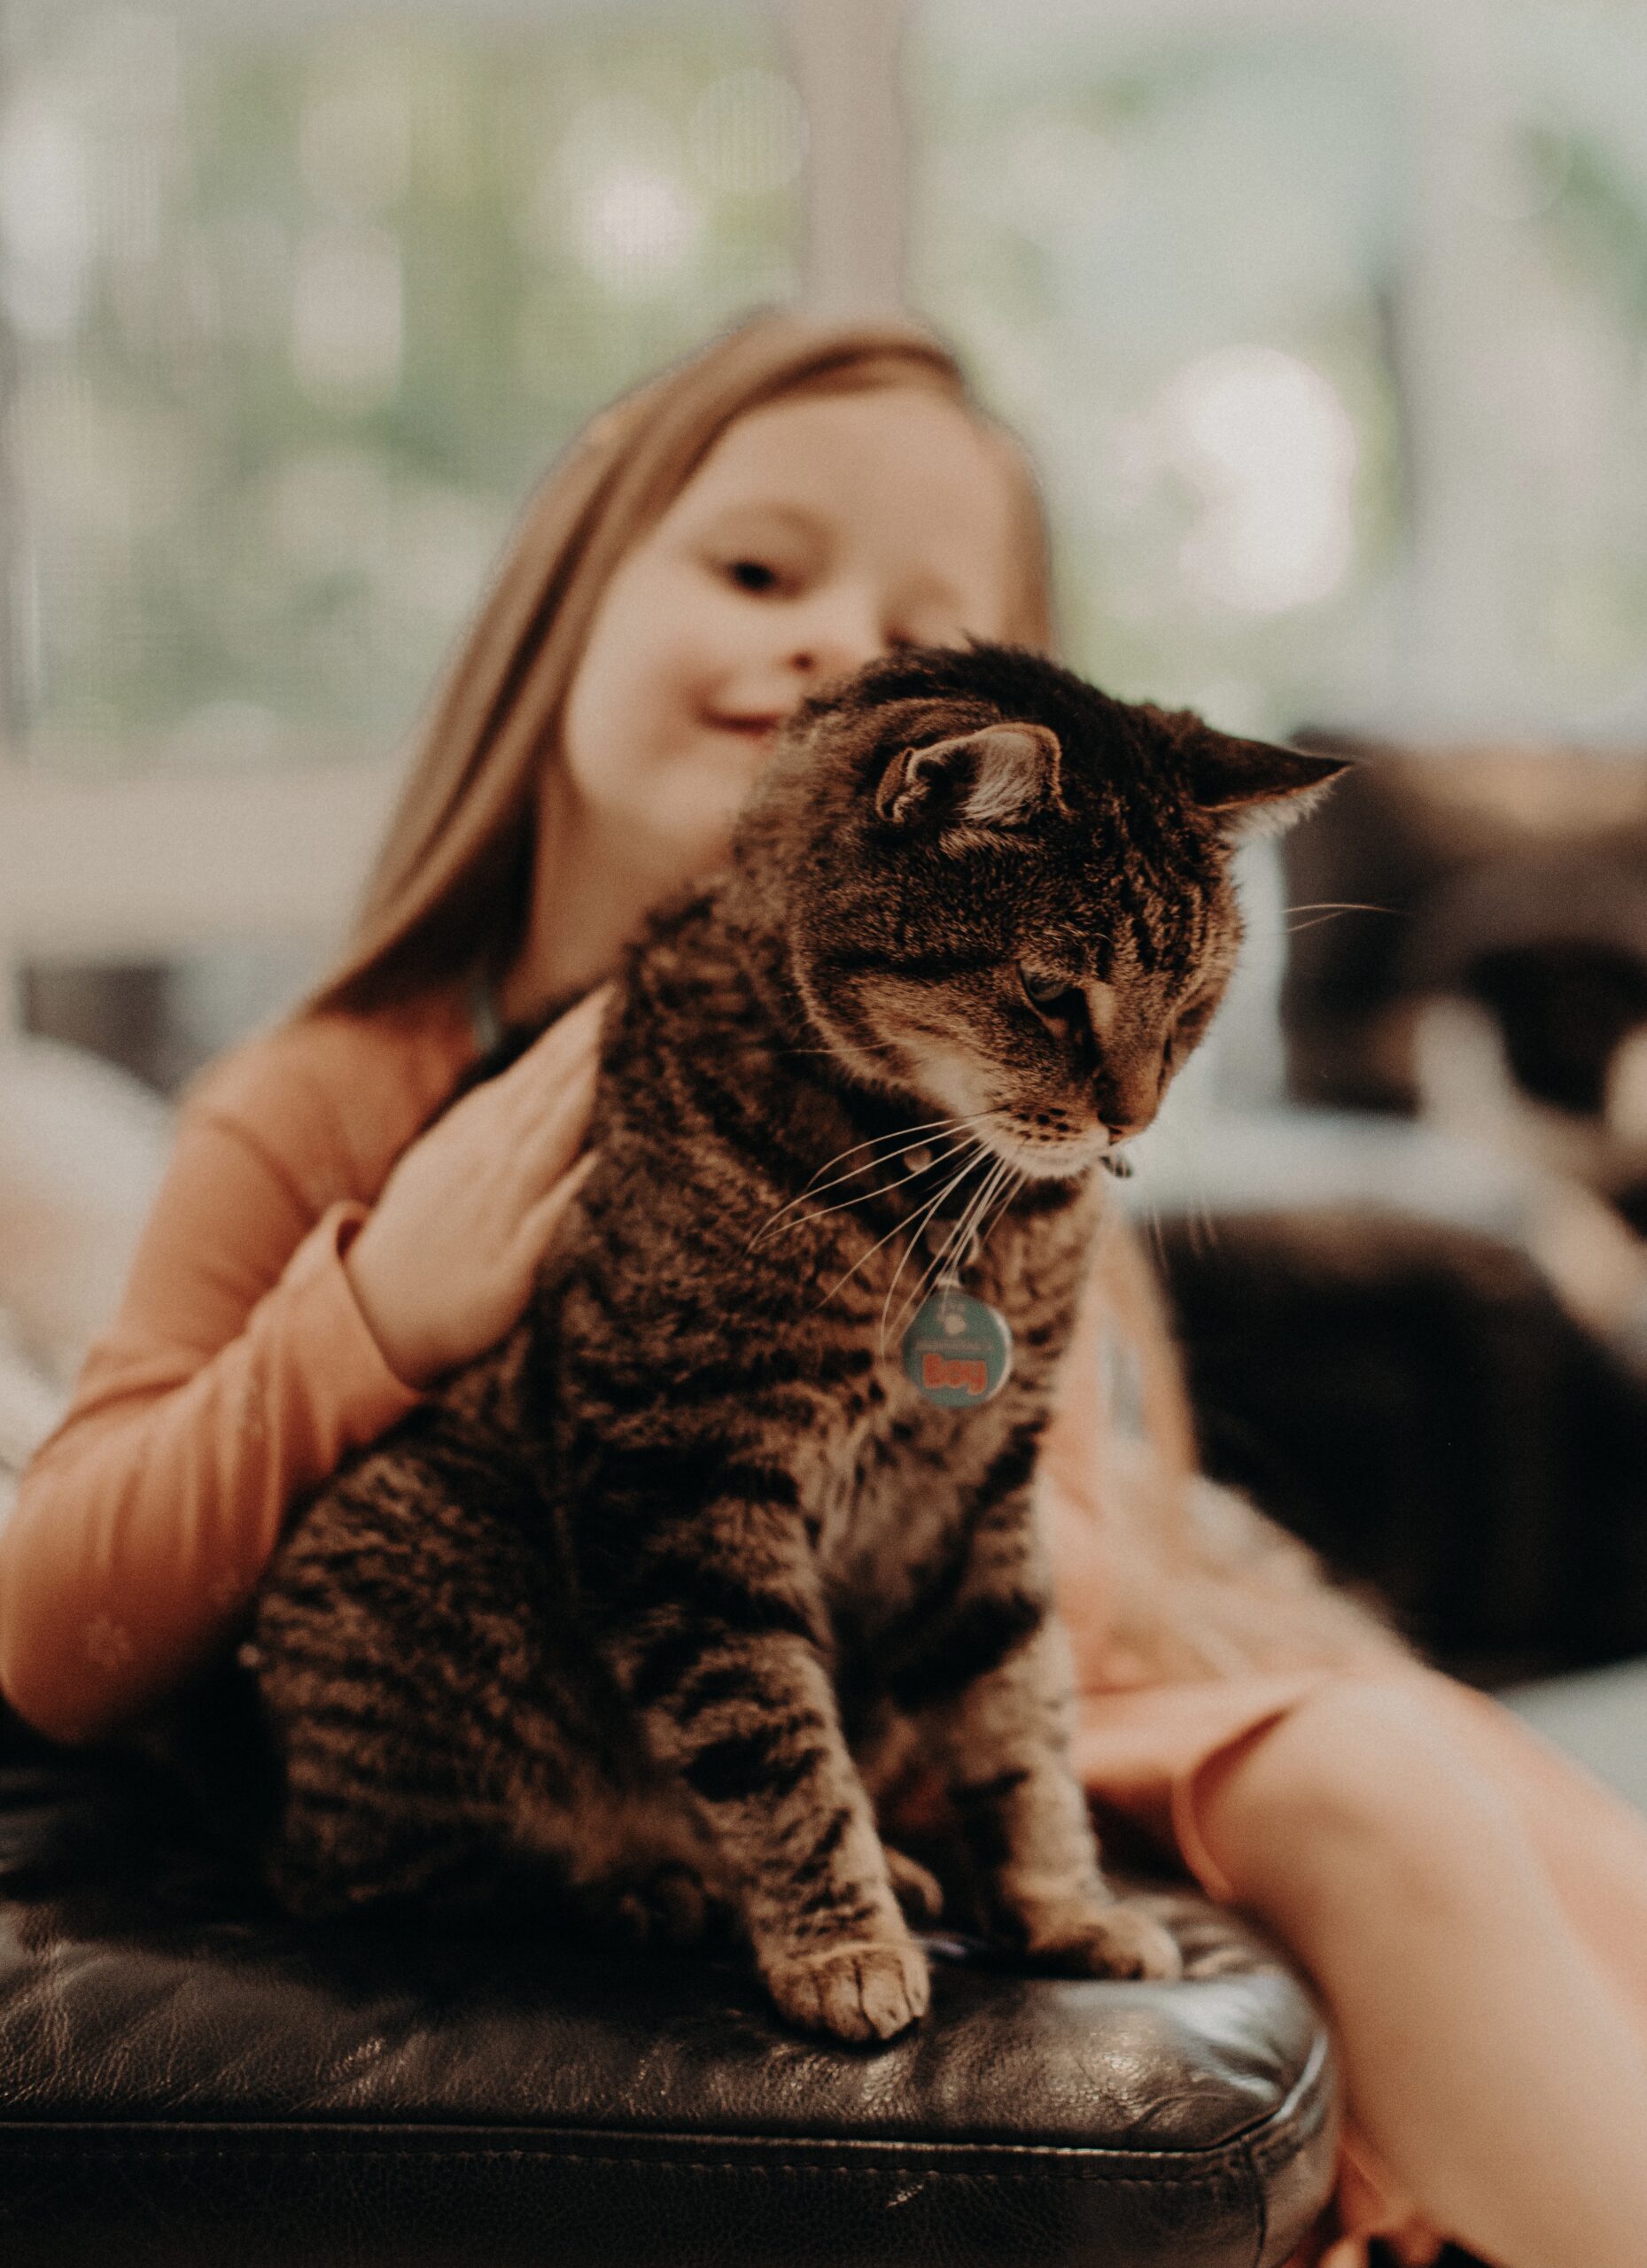 Young girl with pet cat for Animal Friendly Life article on best child-friendly pets